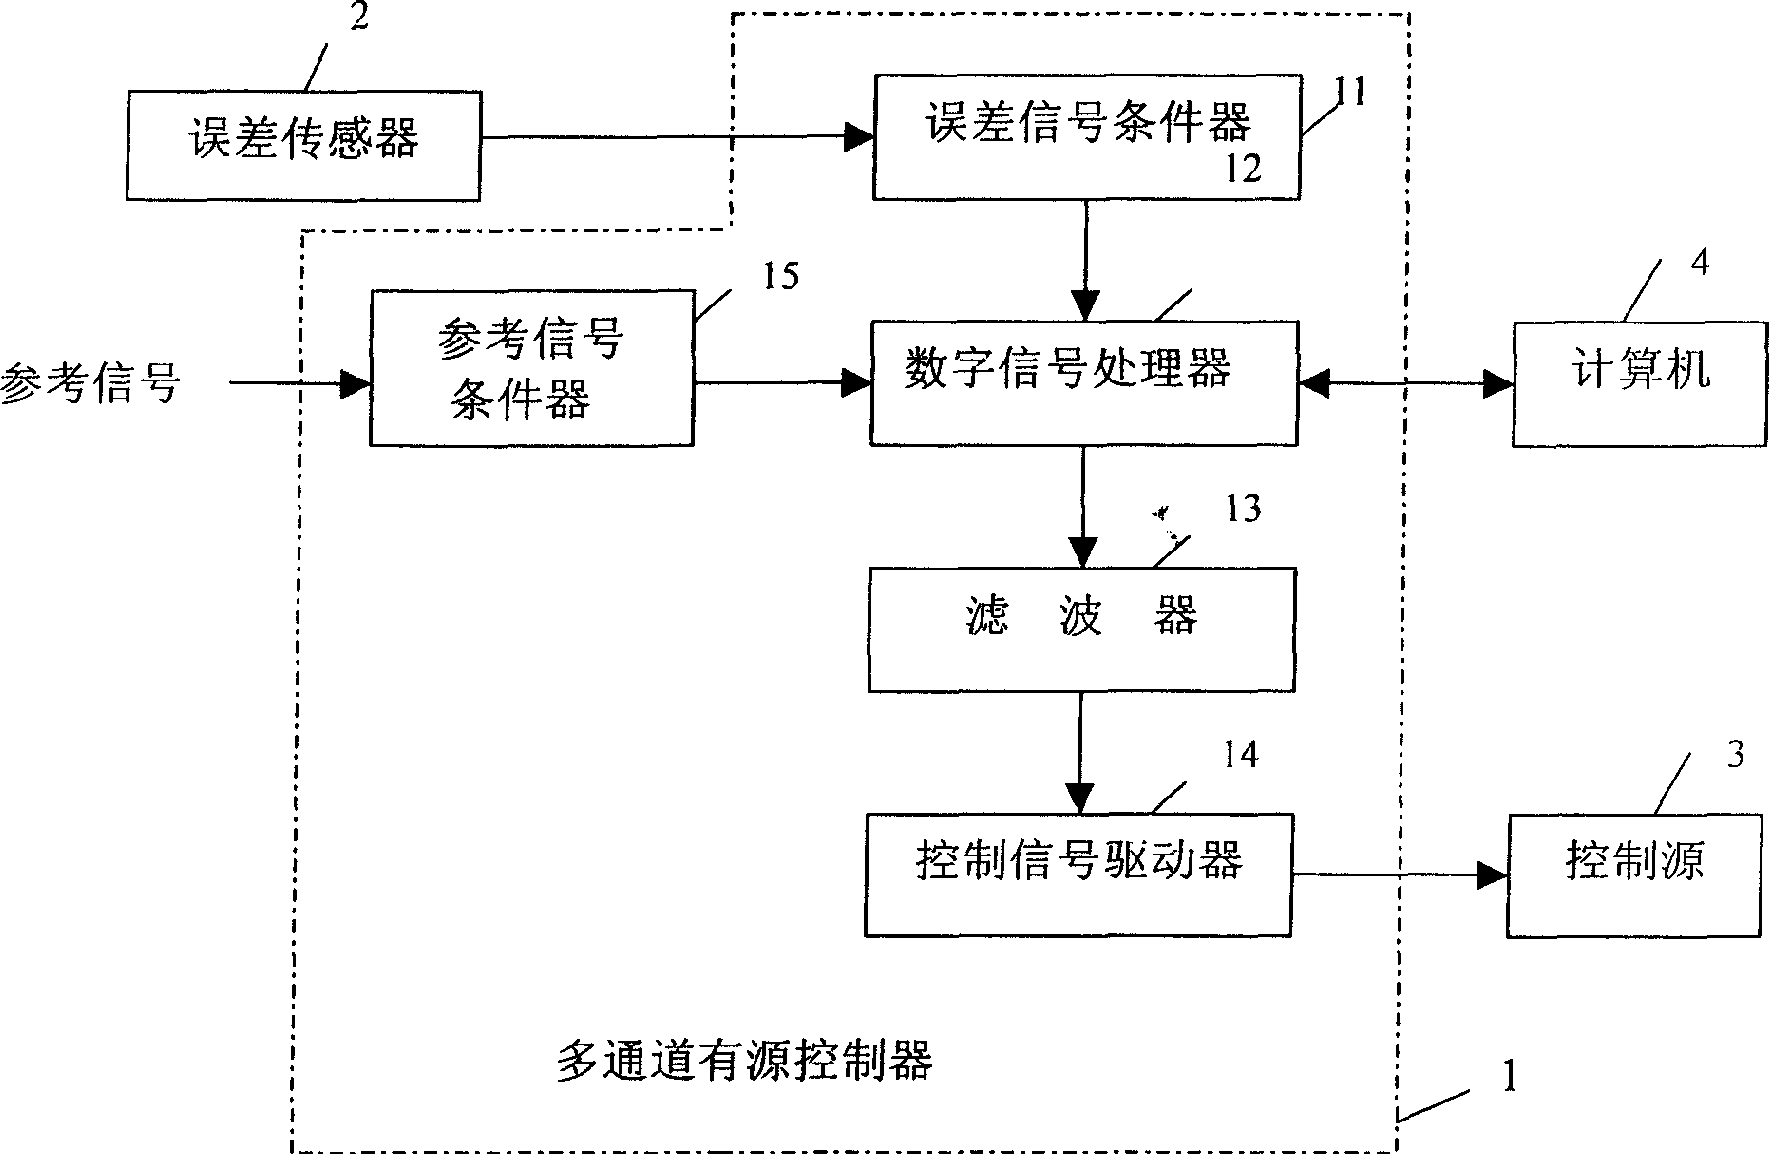 Multi-channel active controller